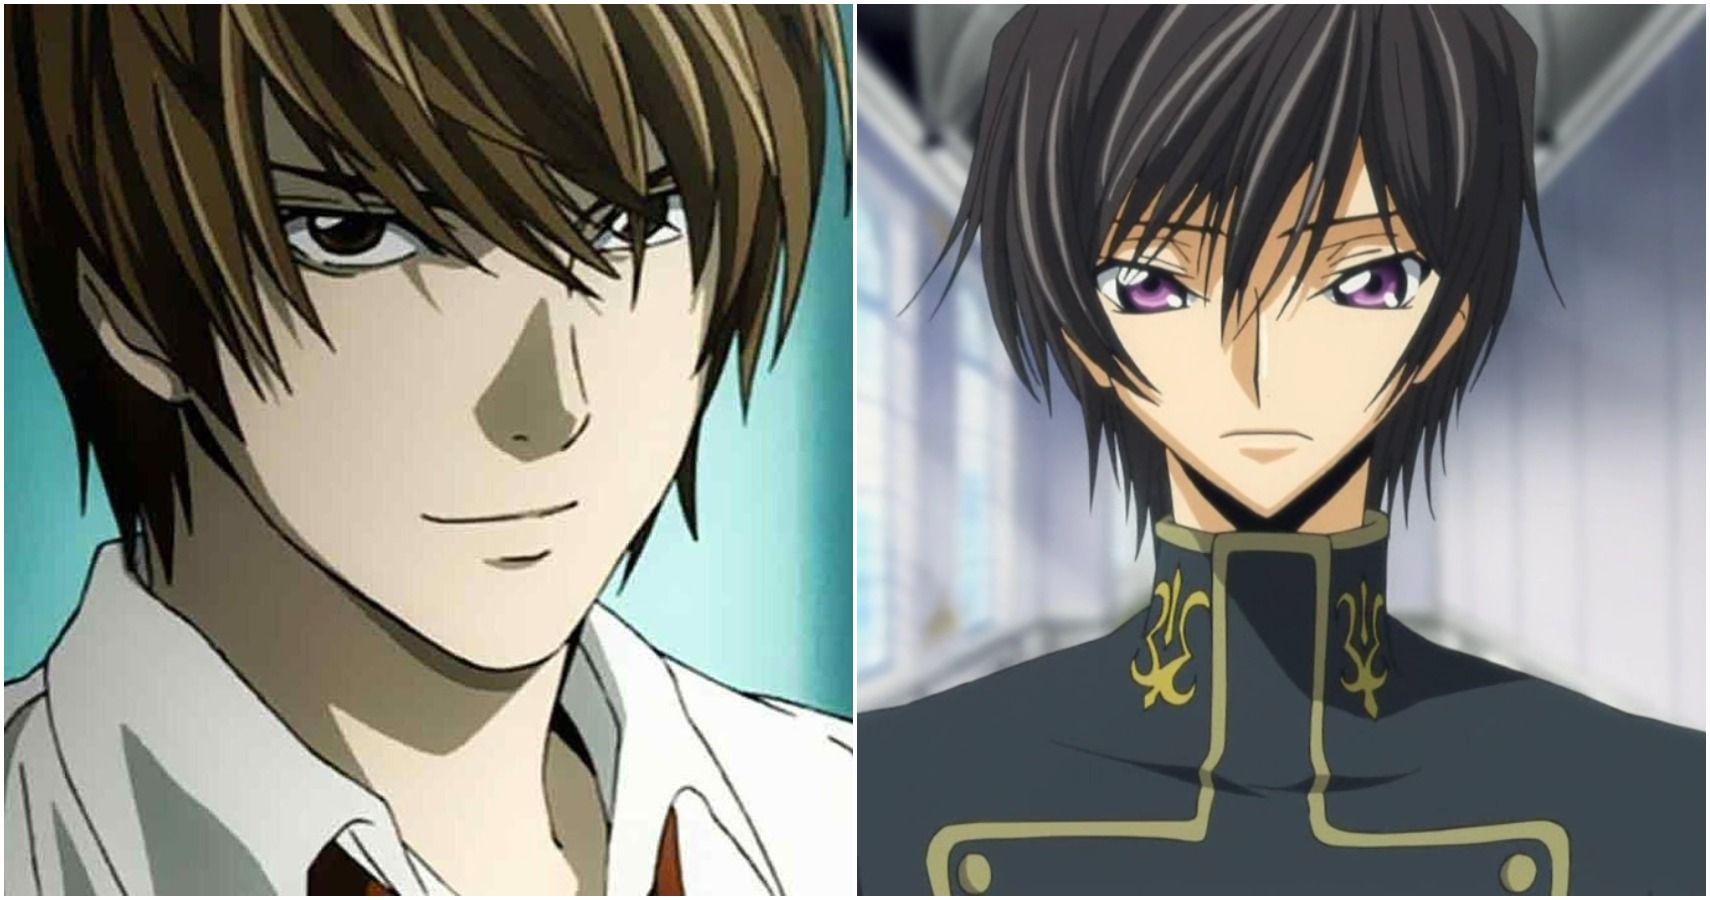 Code Geass: 5 Anime Heroes Lelouch Lamperouge Could Easily Outsmart